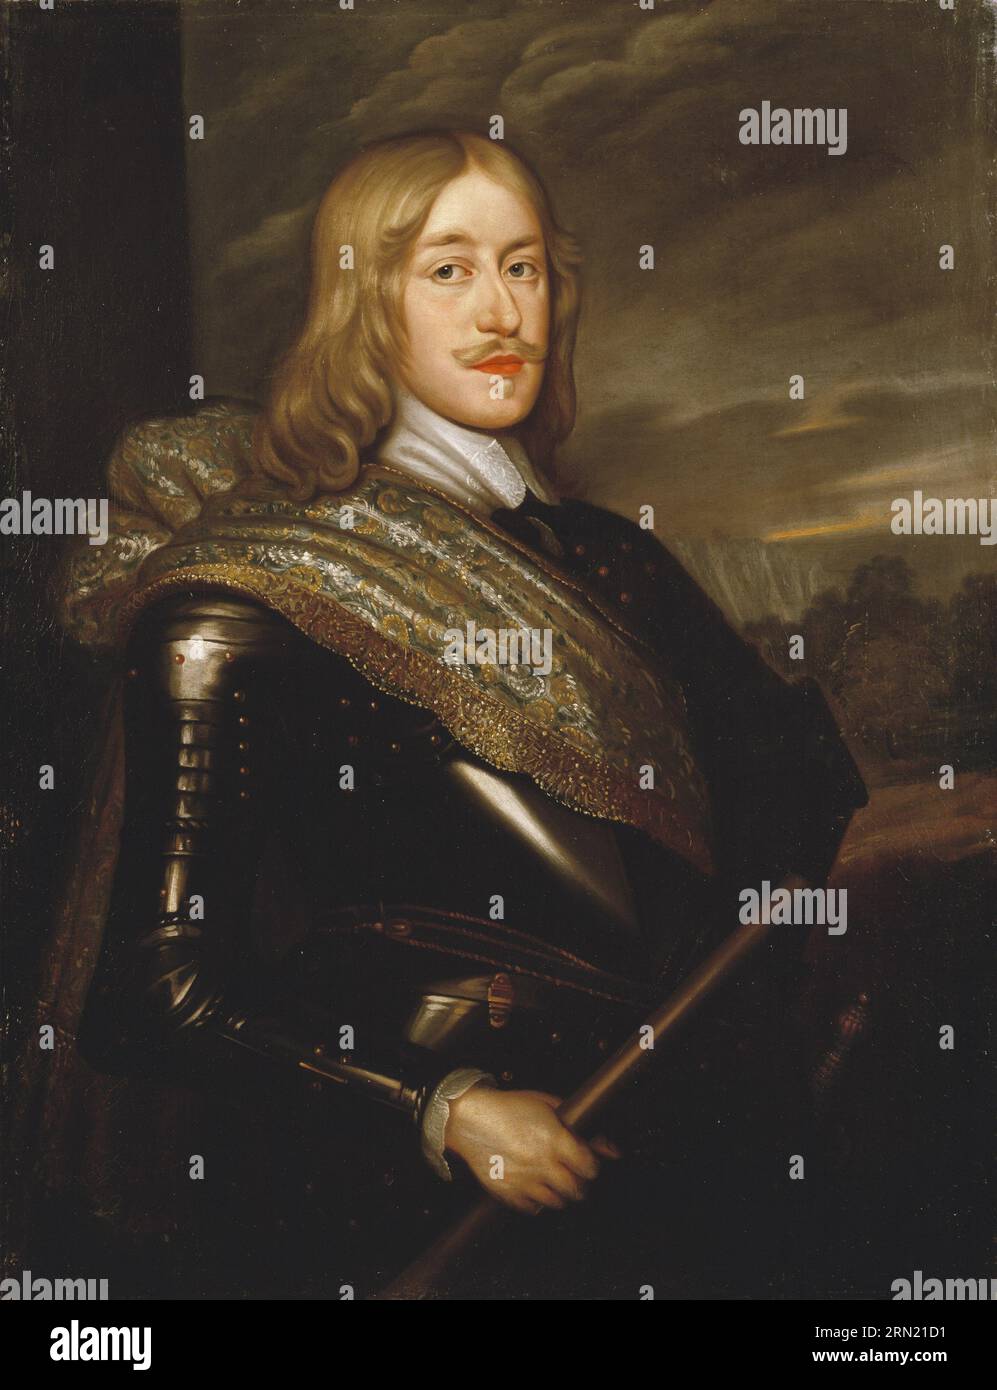 Magnus Gabriel de la Gardie (1622-1686), count, councillor, chancellor, lord chancellor, university chancellor, president of the court of appeal, governor-general of Livland, married to palatine count 17th century by Hendrik Munnichhoven Stock Photo